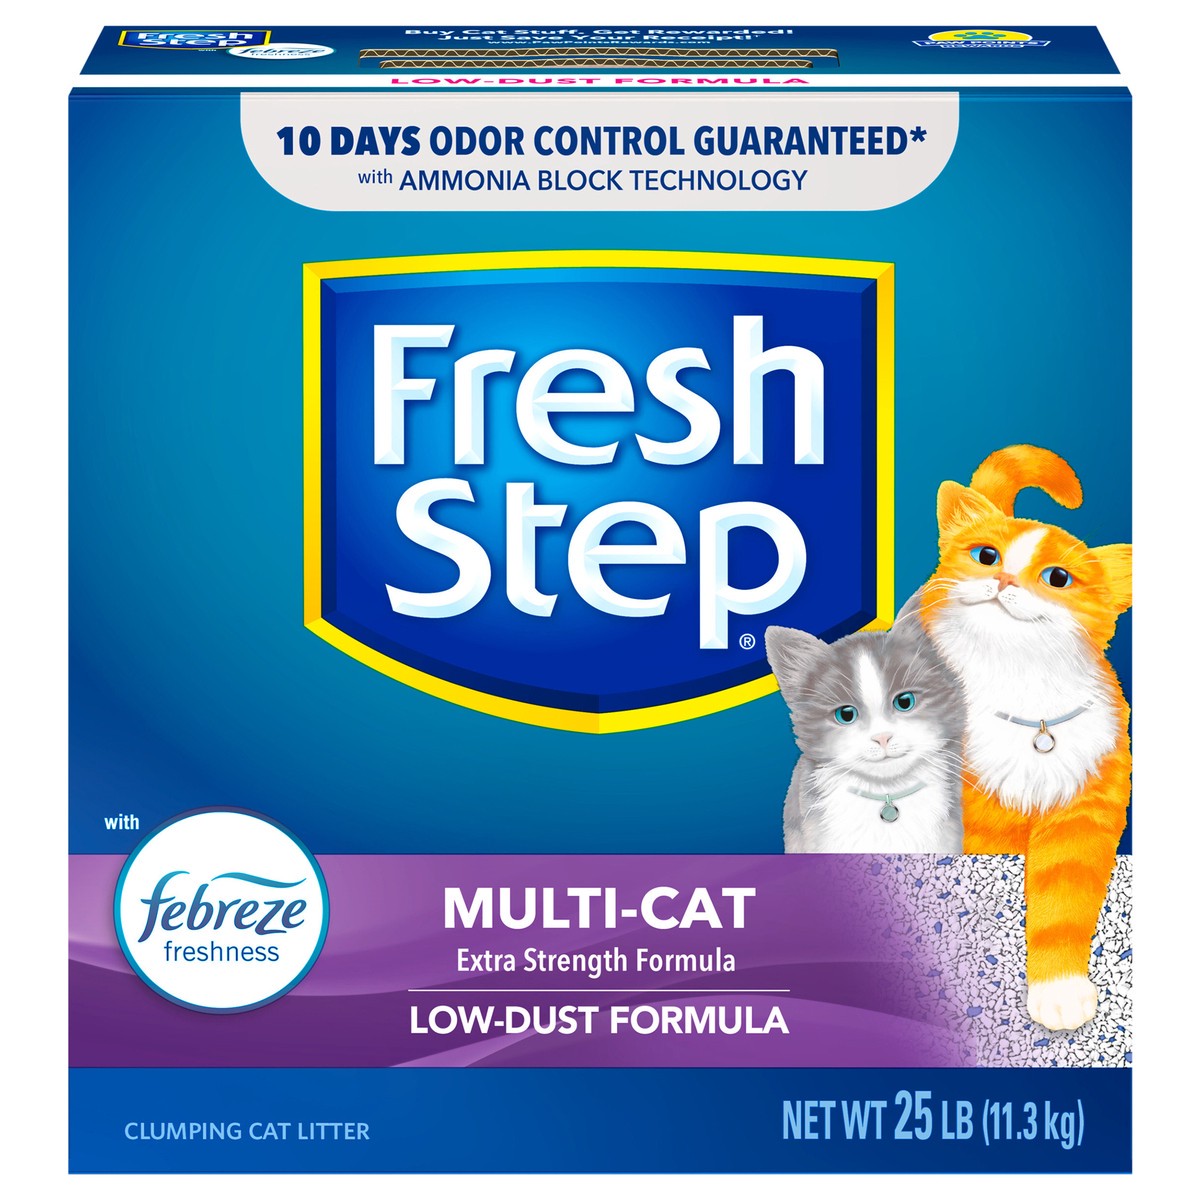 slide 1 of 9, Fresh Step Multi-Cat With Febreze Freshness Scented Clumping Cat Litter, 25 lb